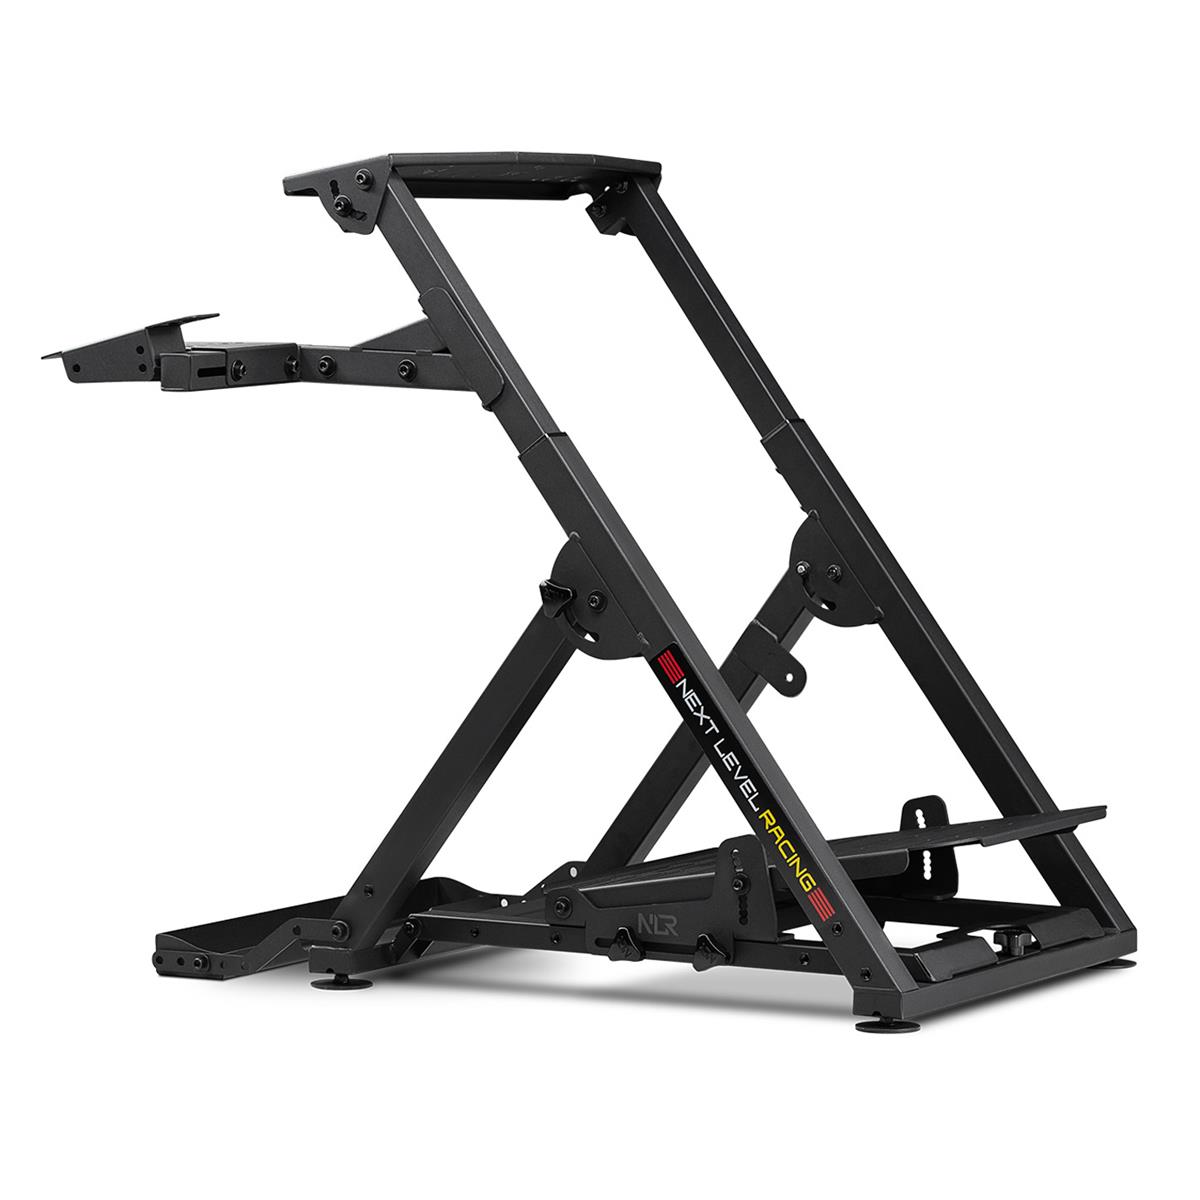 Image of Next Level Racing Wheel Stand 2.0 for Wheels